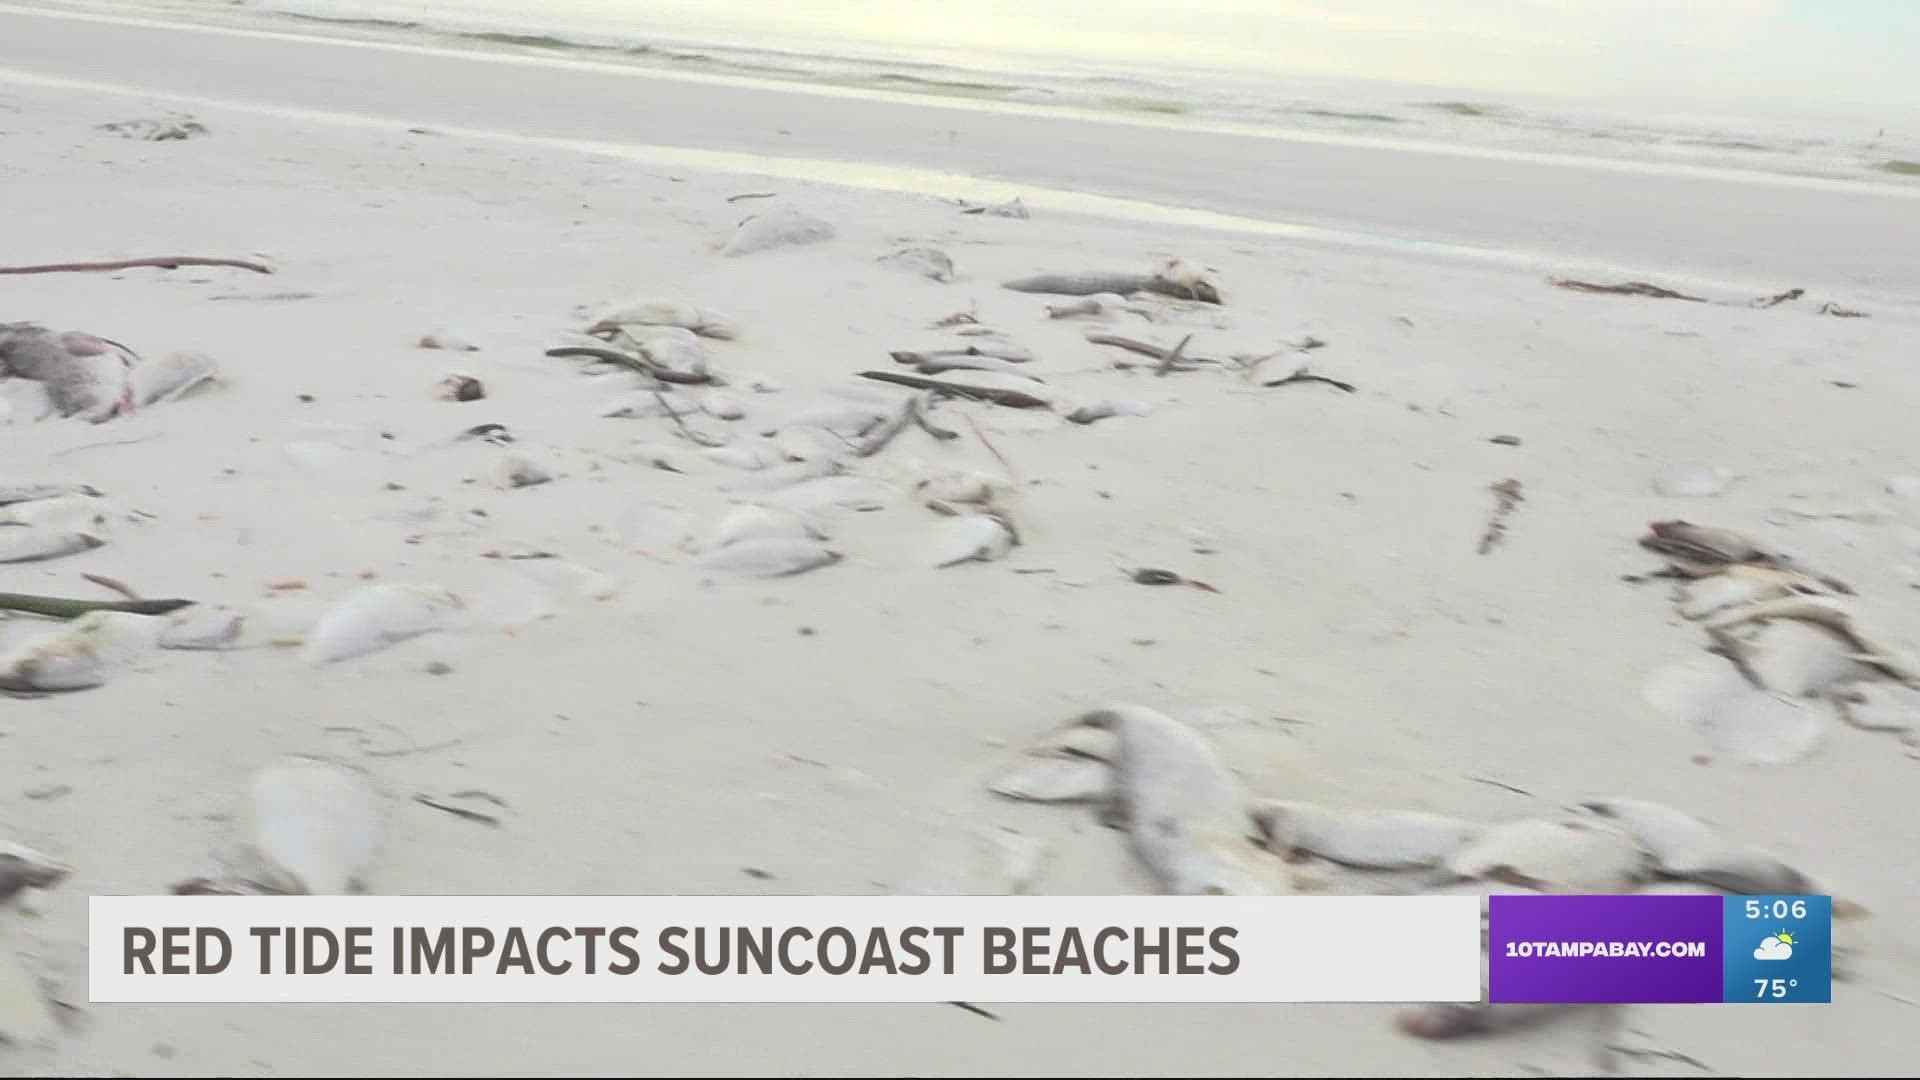 Longboat Key and Bradenton Beach are also seeing dead fish washing ashore.